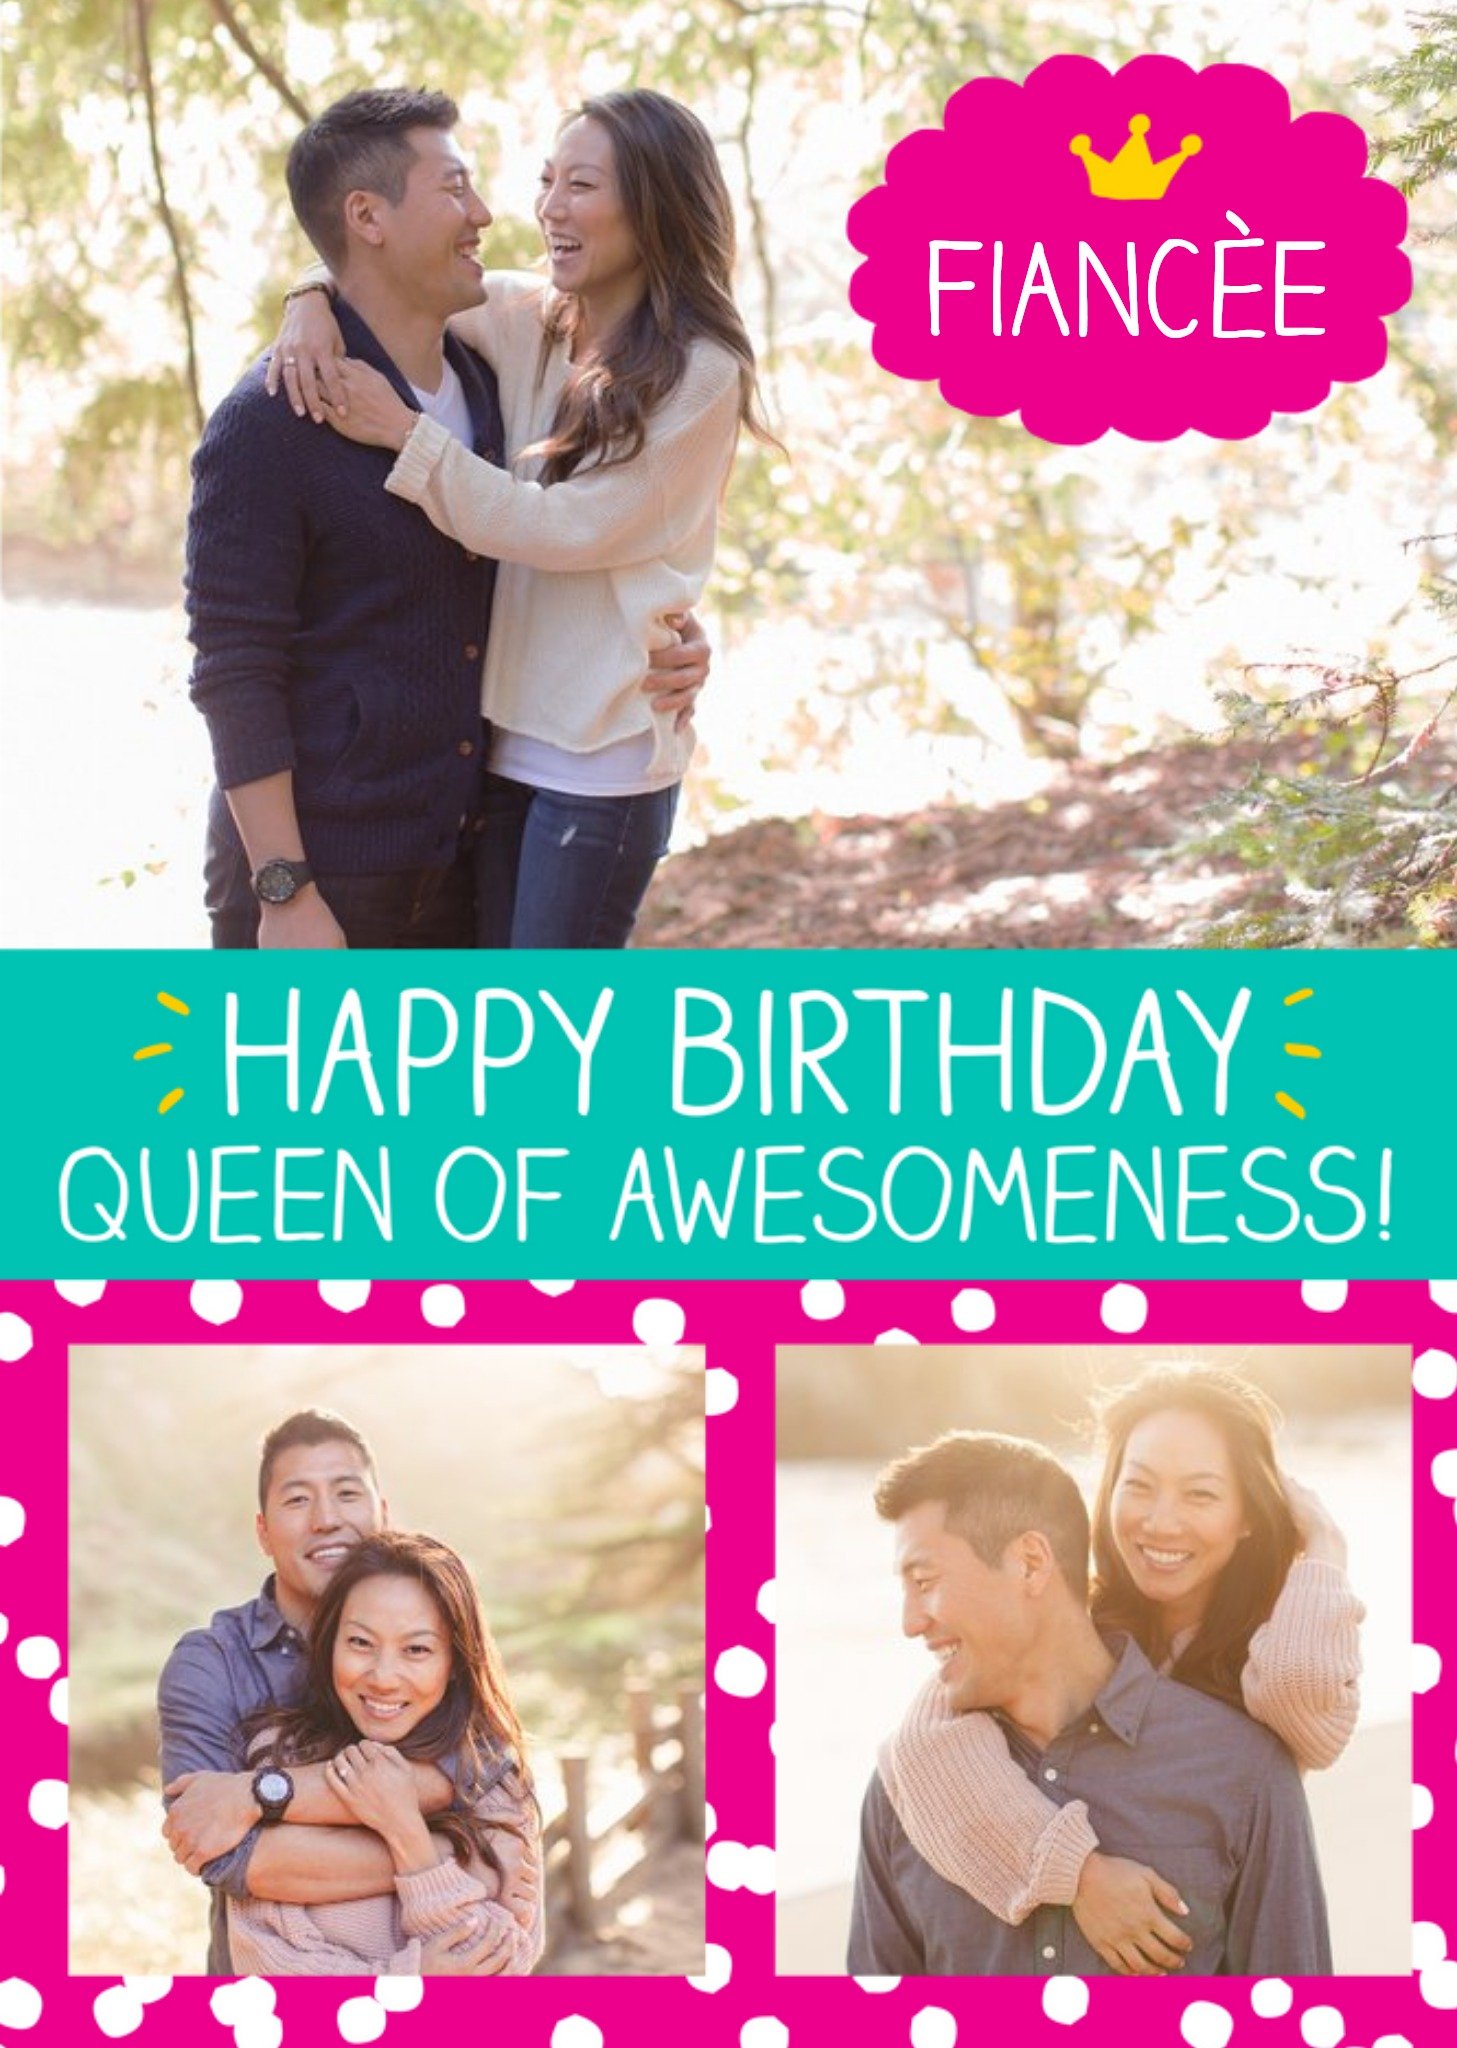 Happy Jackson Fiancee Queen Of Awesomeness Personalised Photo Upload Birthday Card Ecard